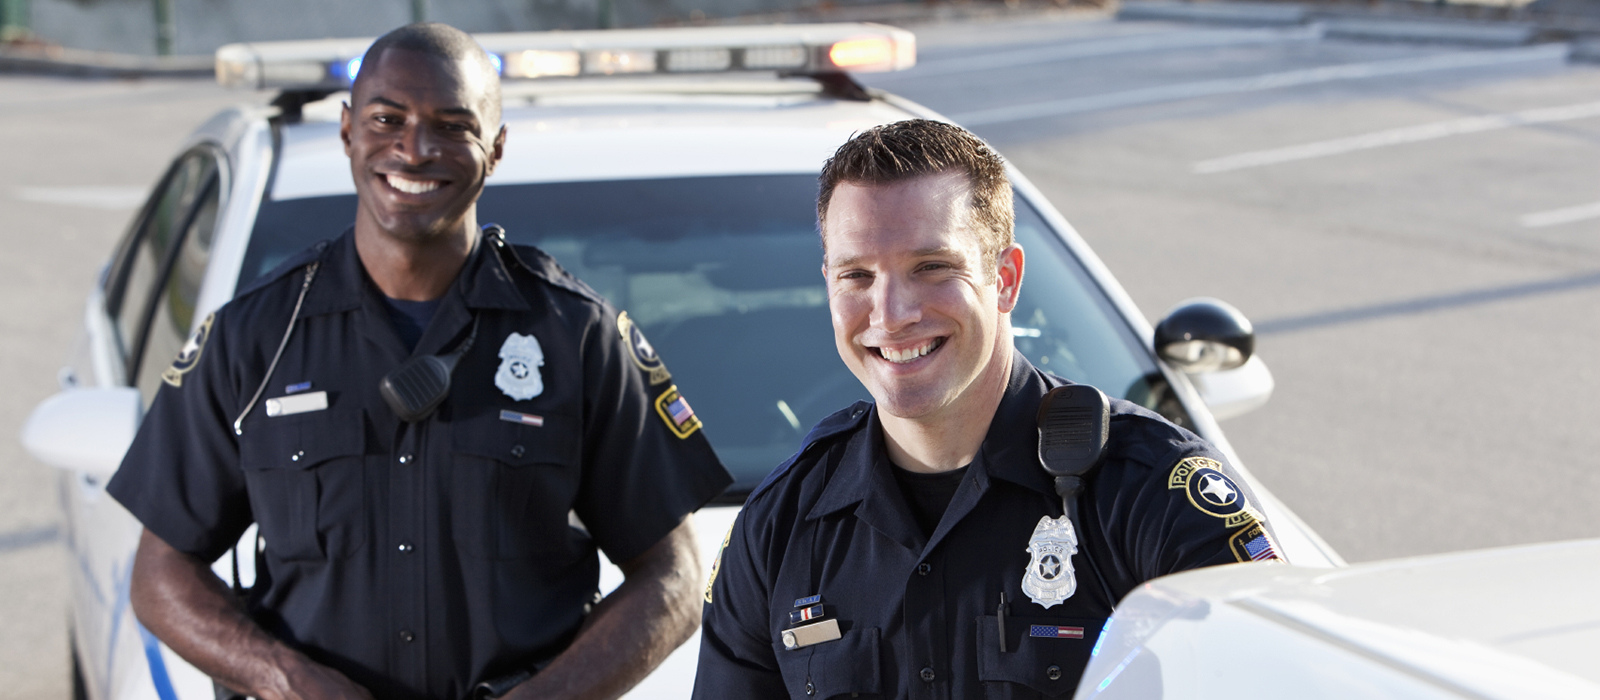 Two California police officers.